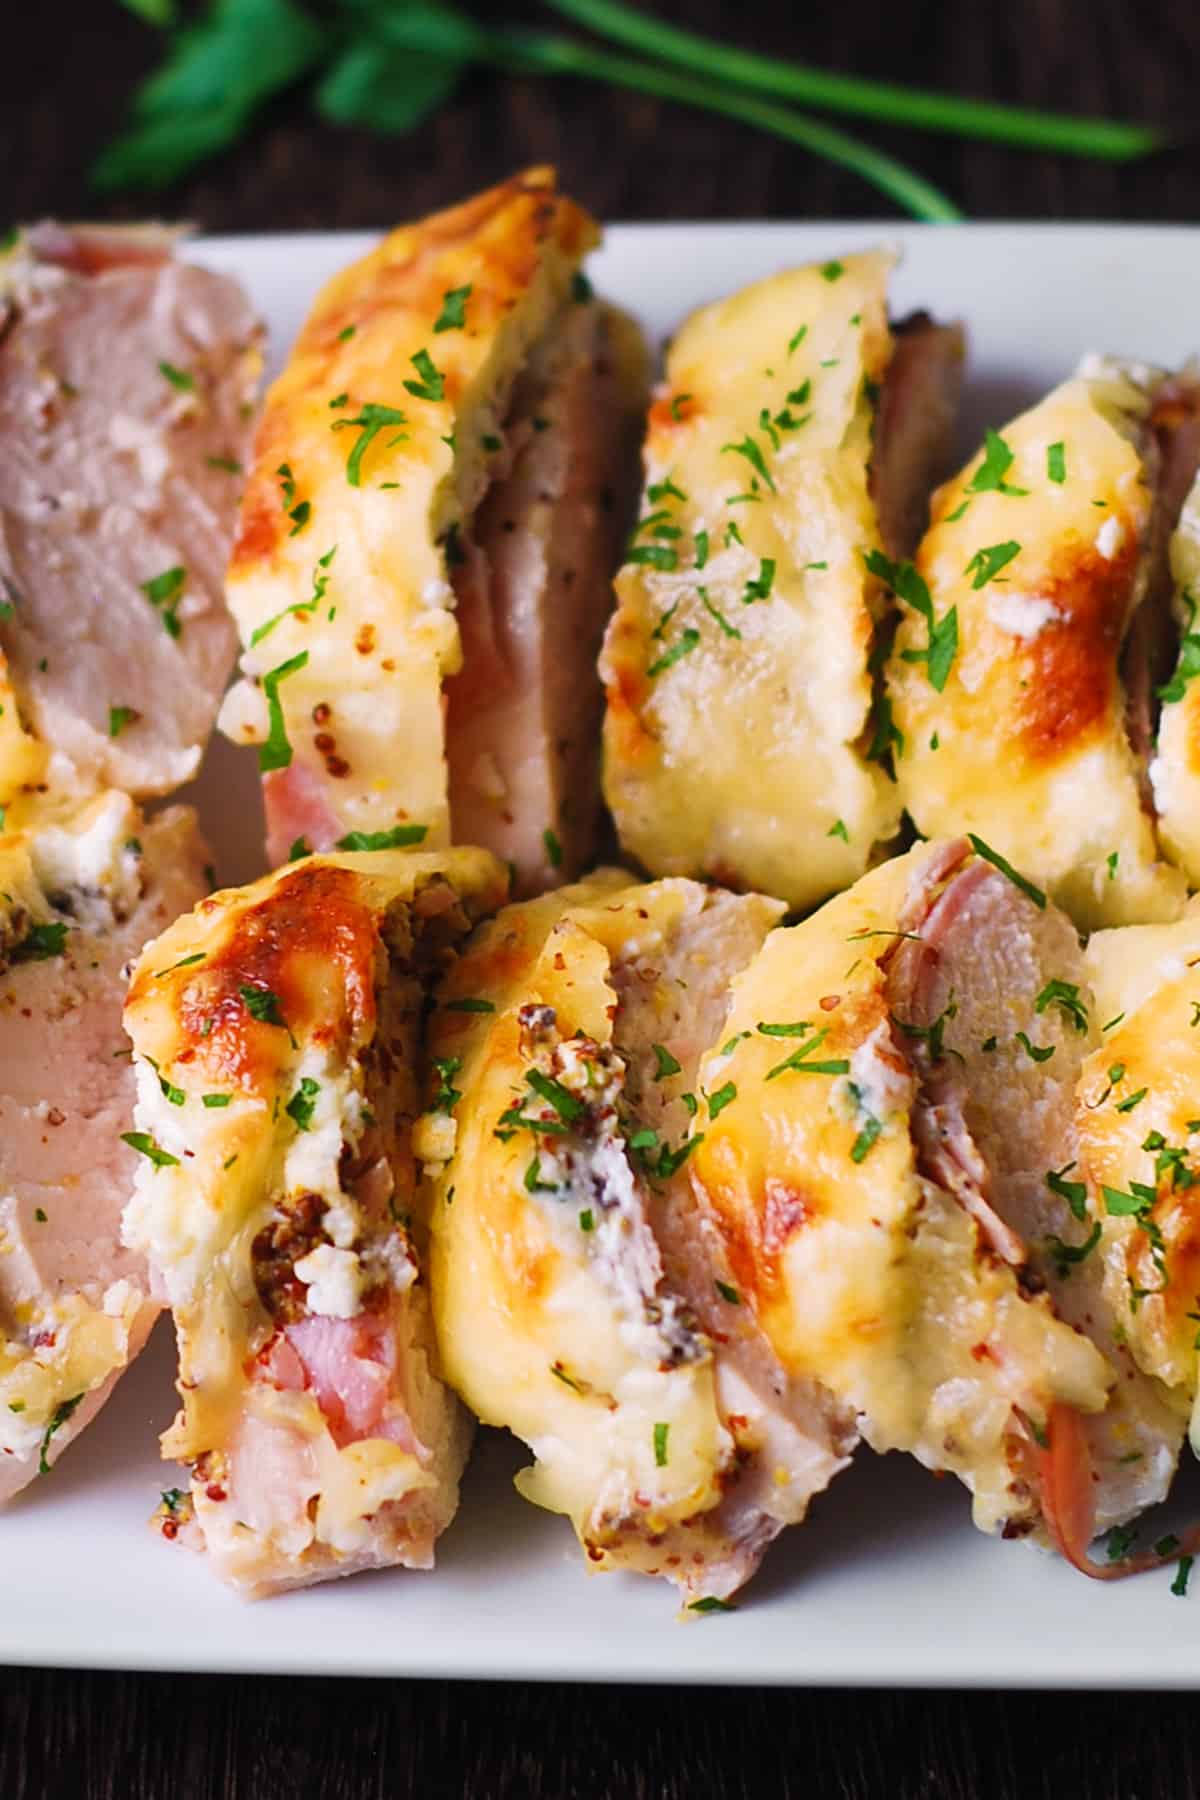 Chicken Cordon Bleu (chicken with layers of ham and Swiss cheese) - sliced on a plate.